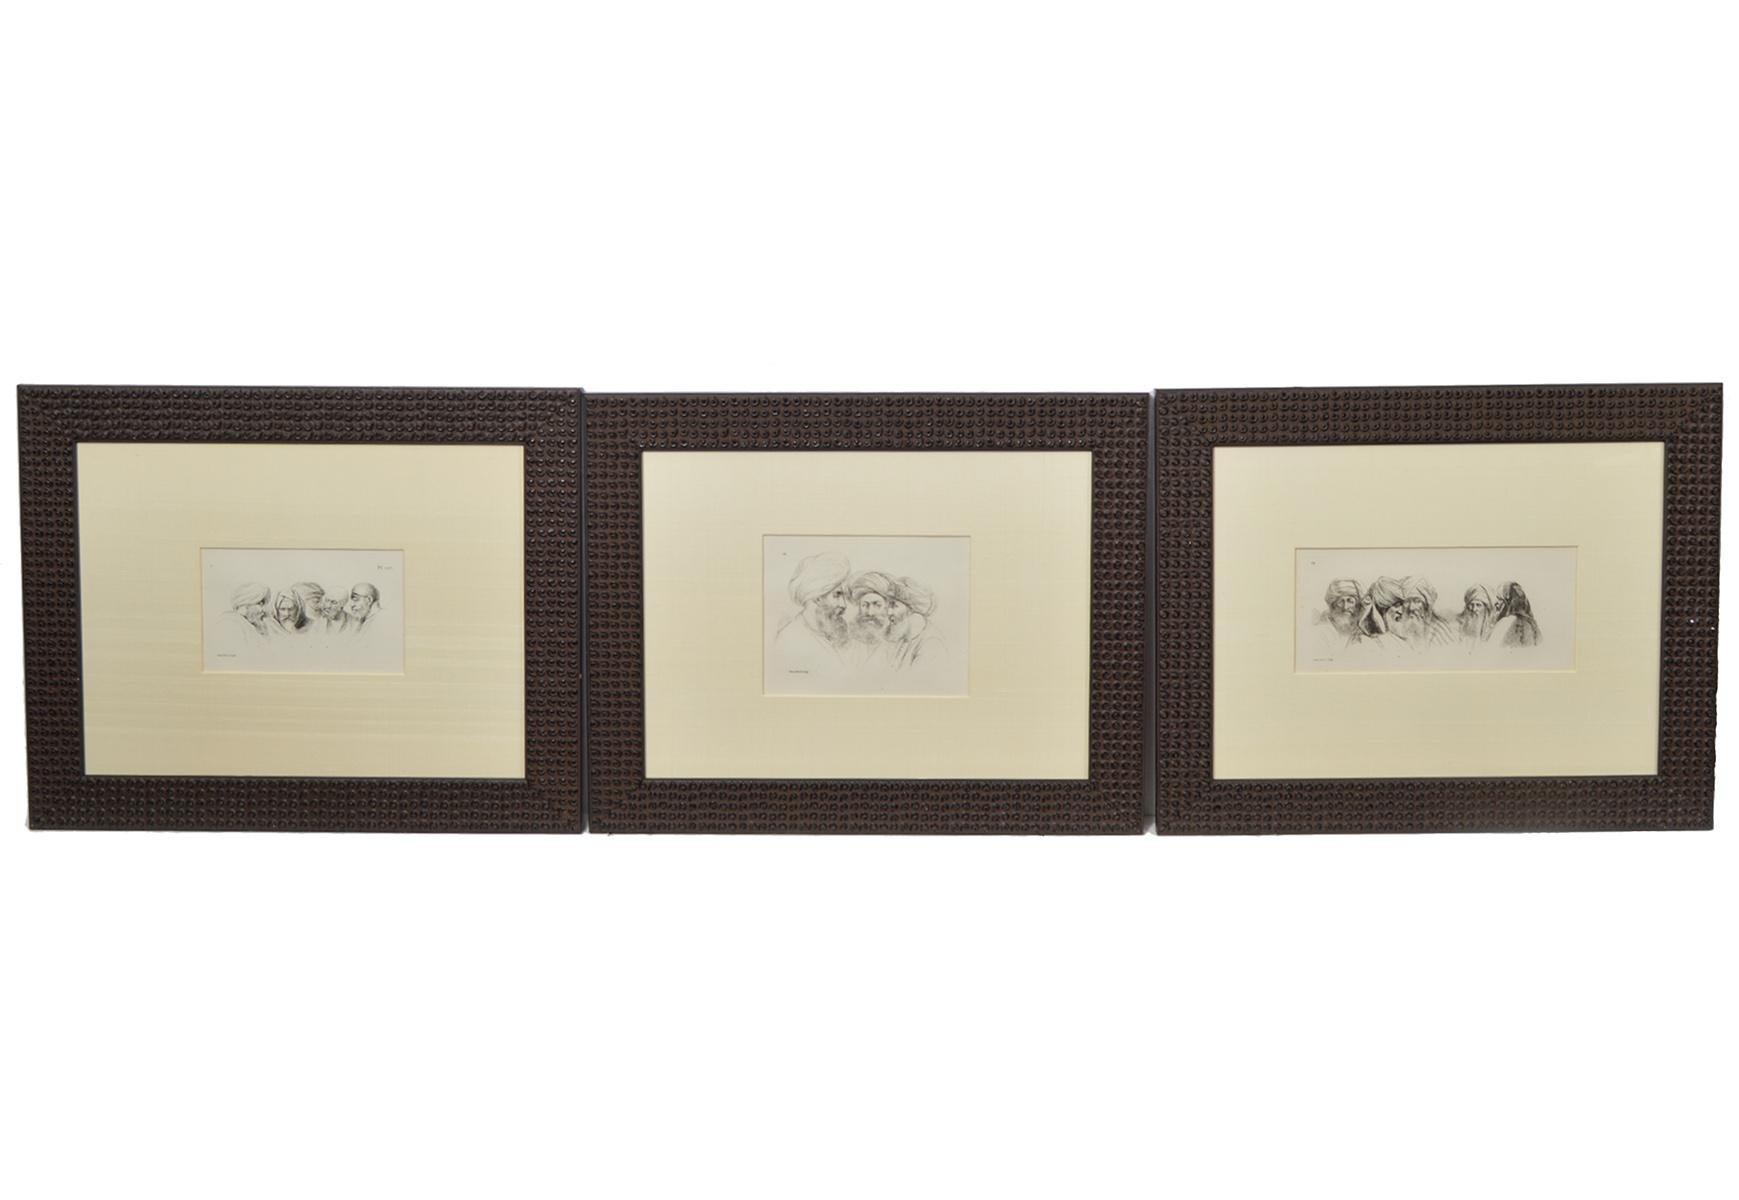 20th Century Group of 9 Framed Engraved Egyptology Book Plates by Vivant Denon, Early 20th C.